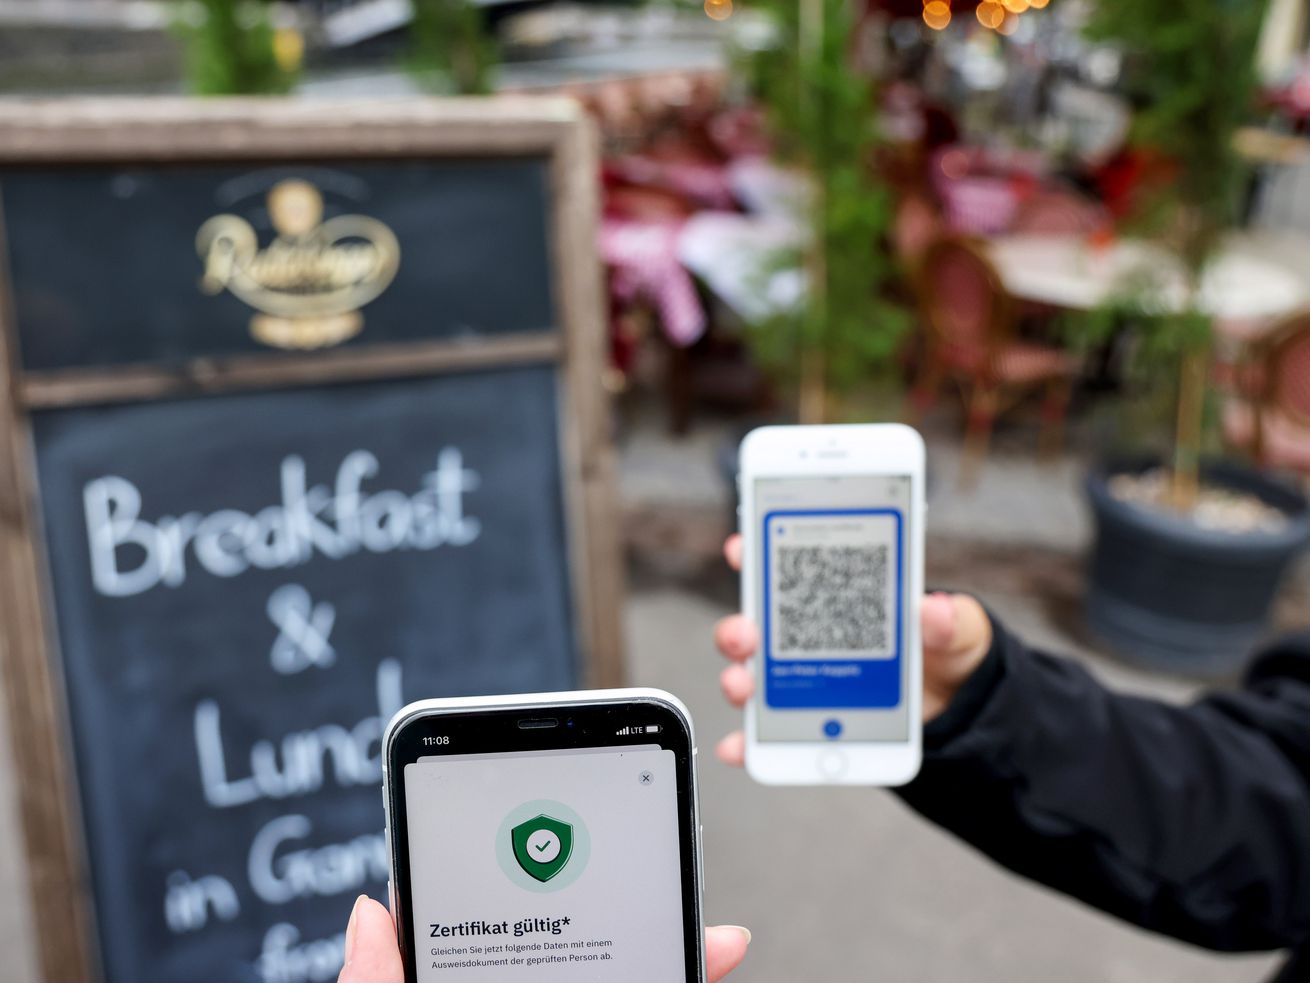 A restaurant patron holds up their phone with a QR code so the host can scan it with their phone.